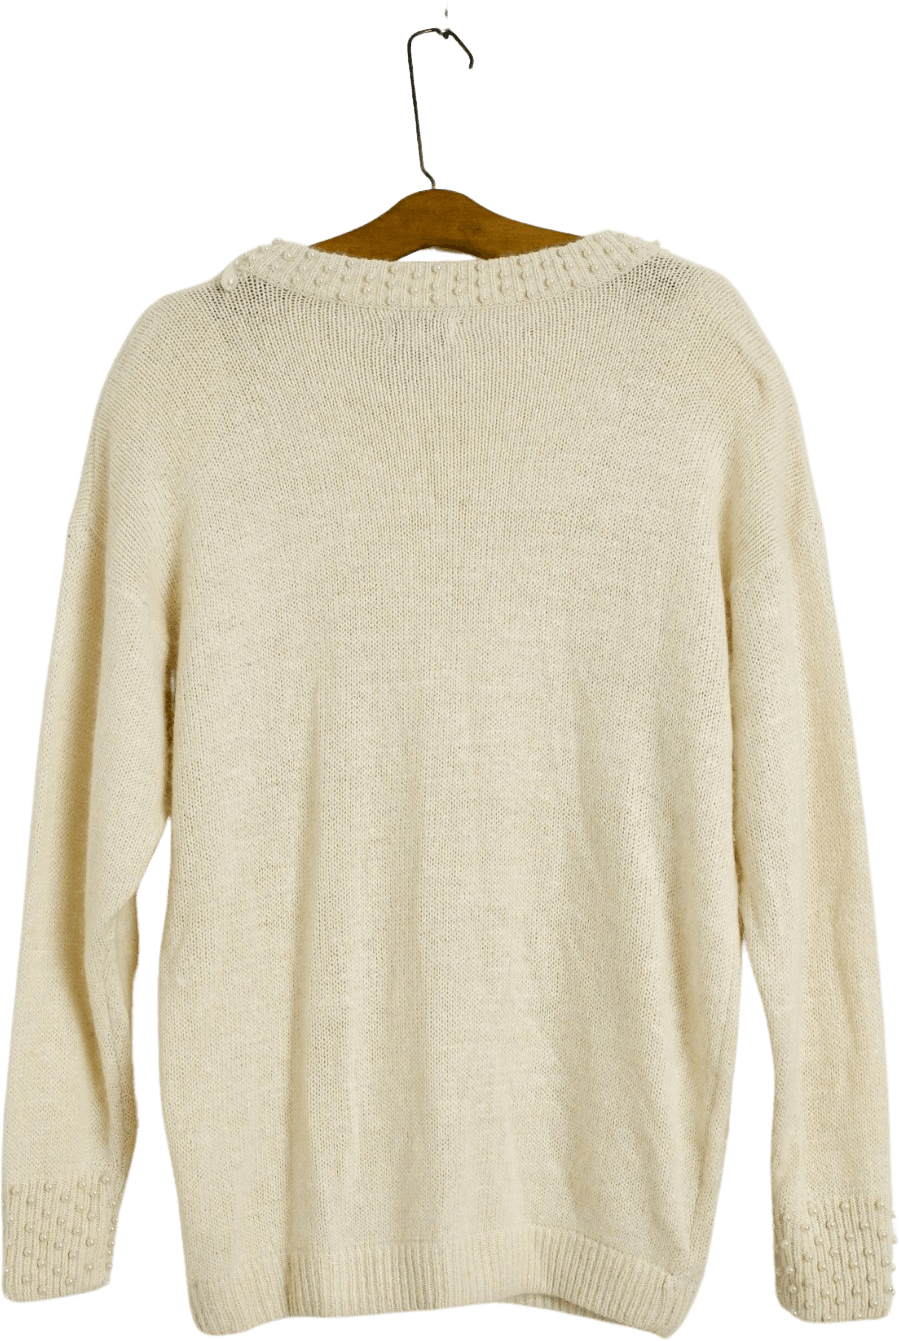 Vintage 80’s Ivory Beaded Tear Drop Knit Sweater | Shop THRILLING